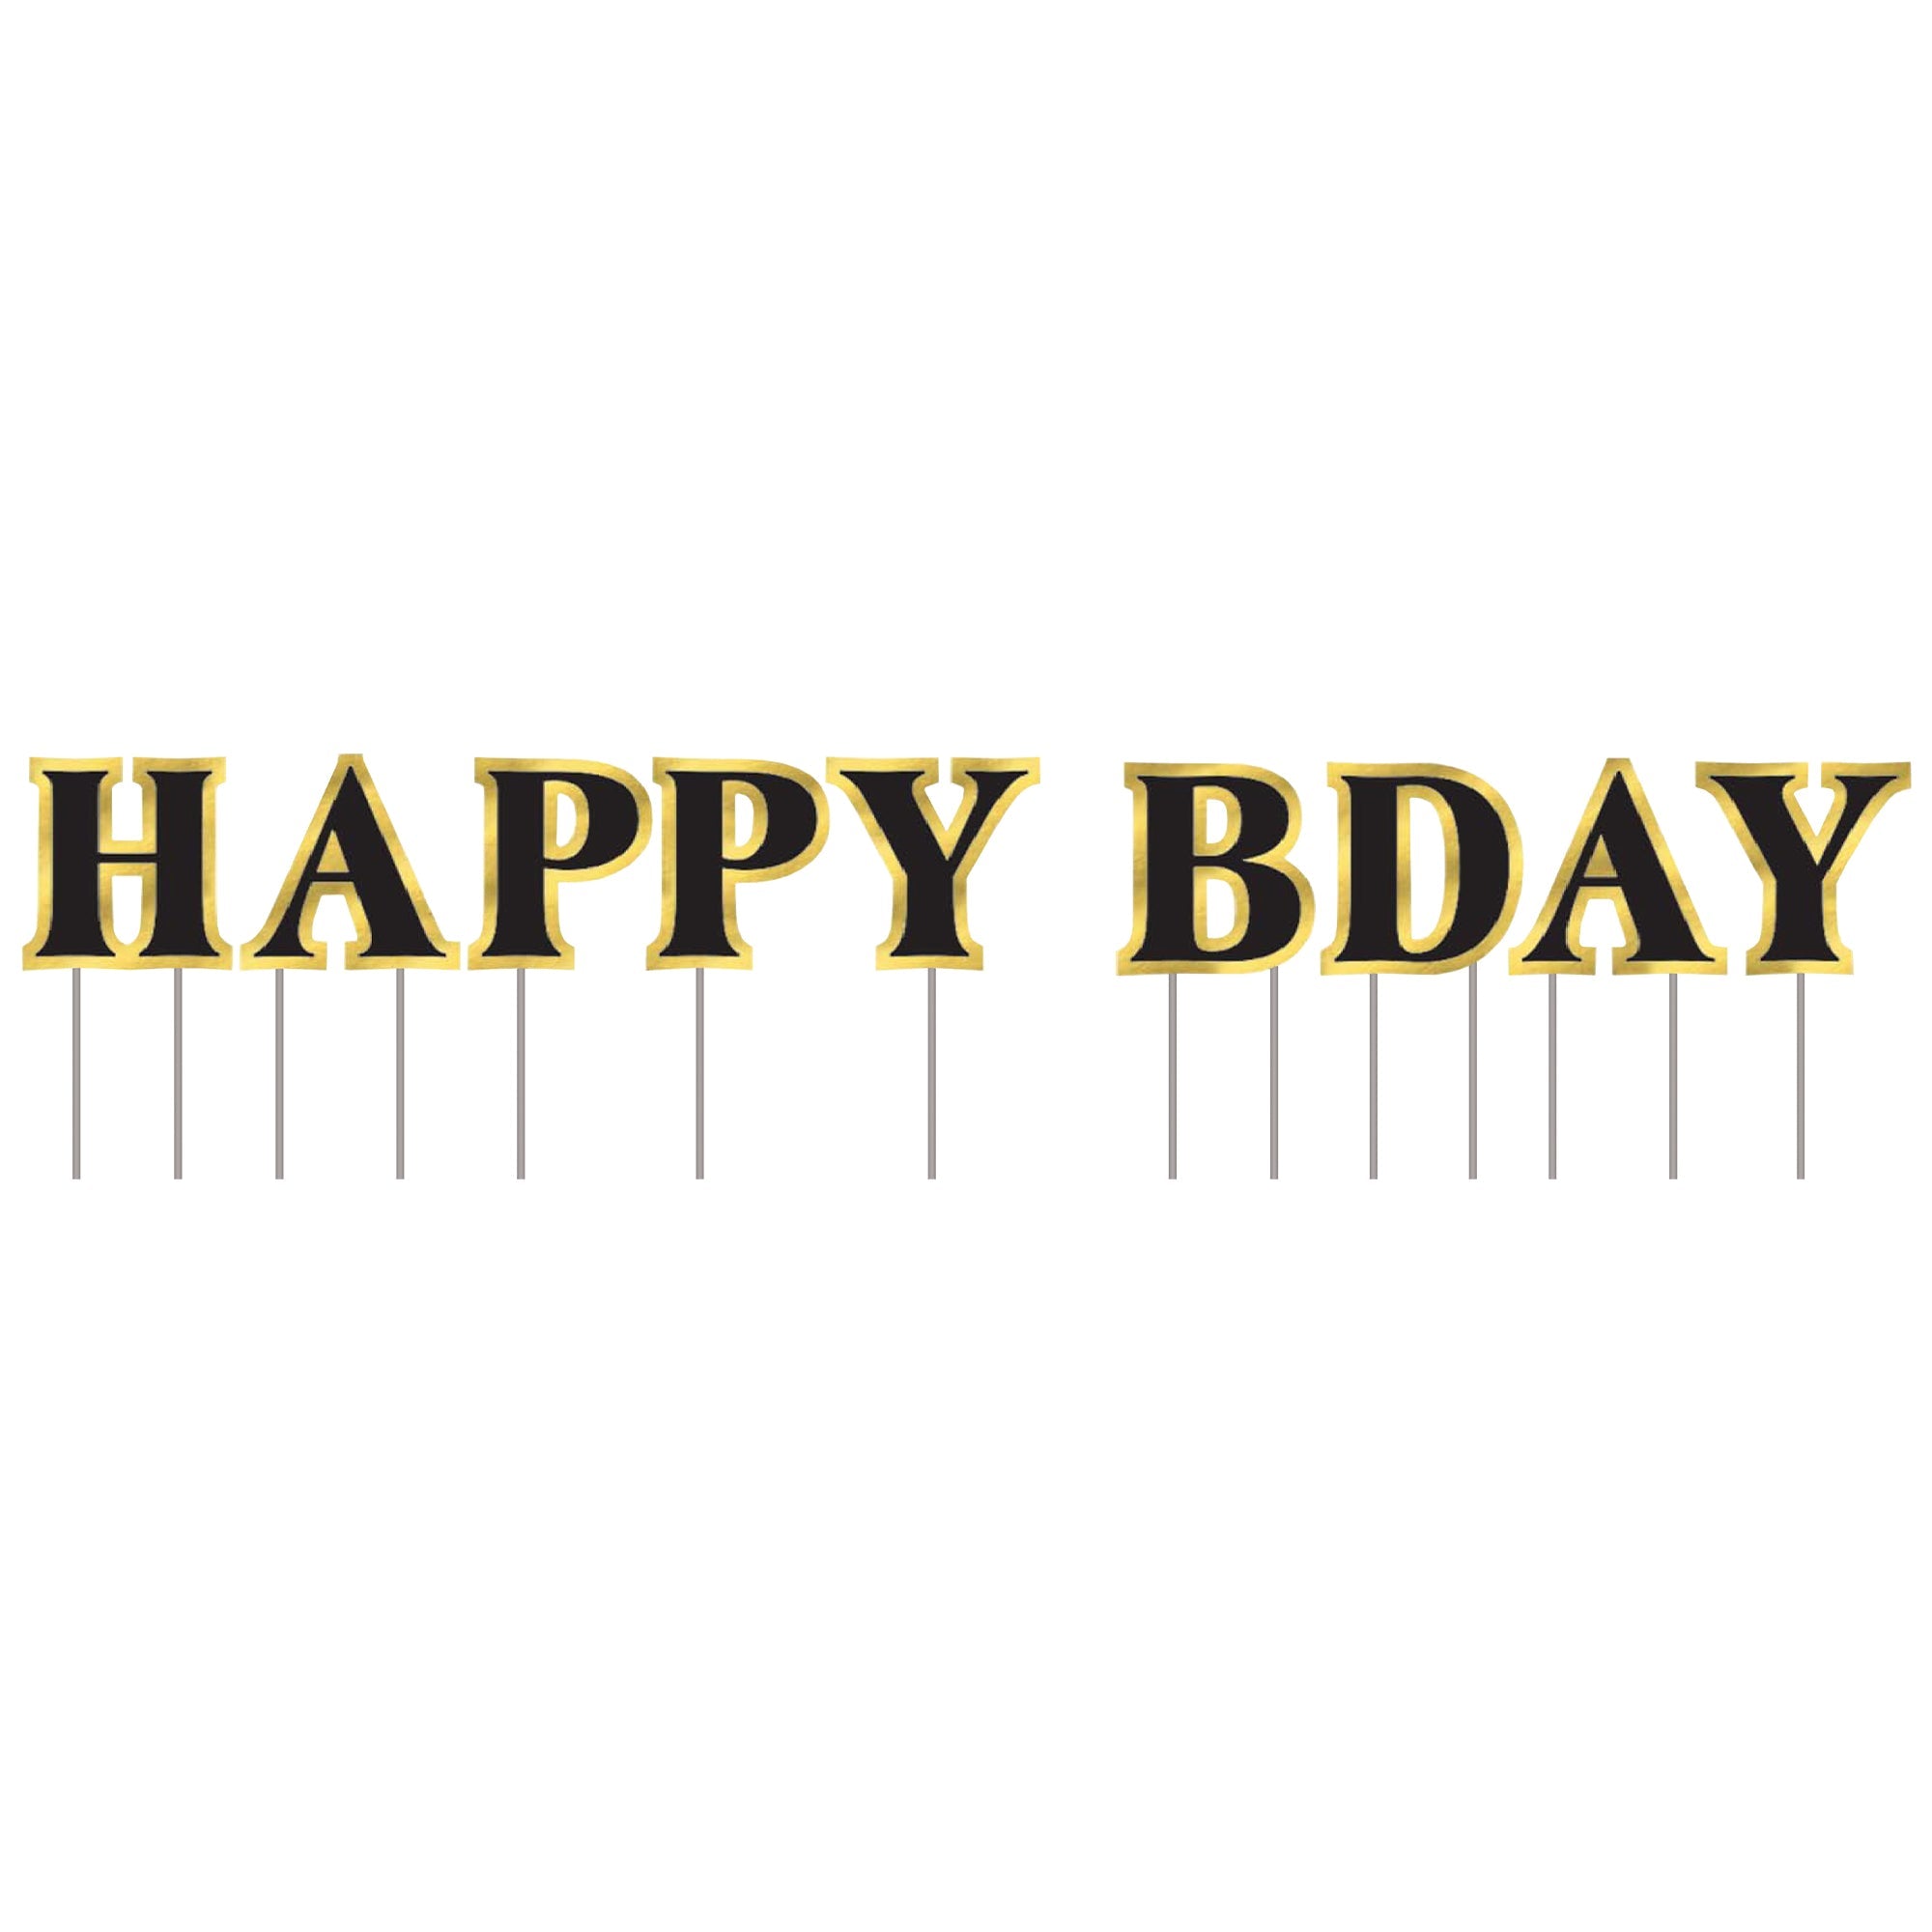 Happy Birthday Better with Age 9 piece  10 1/2" - 15 3/4" letter size Birthday Yard Sign